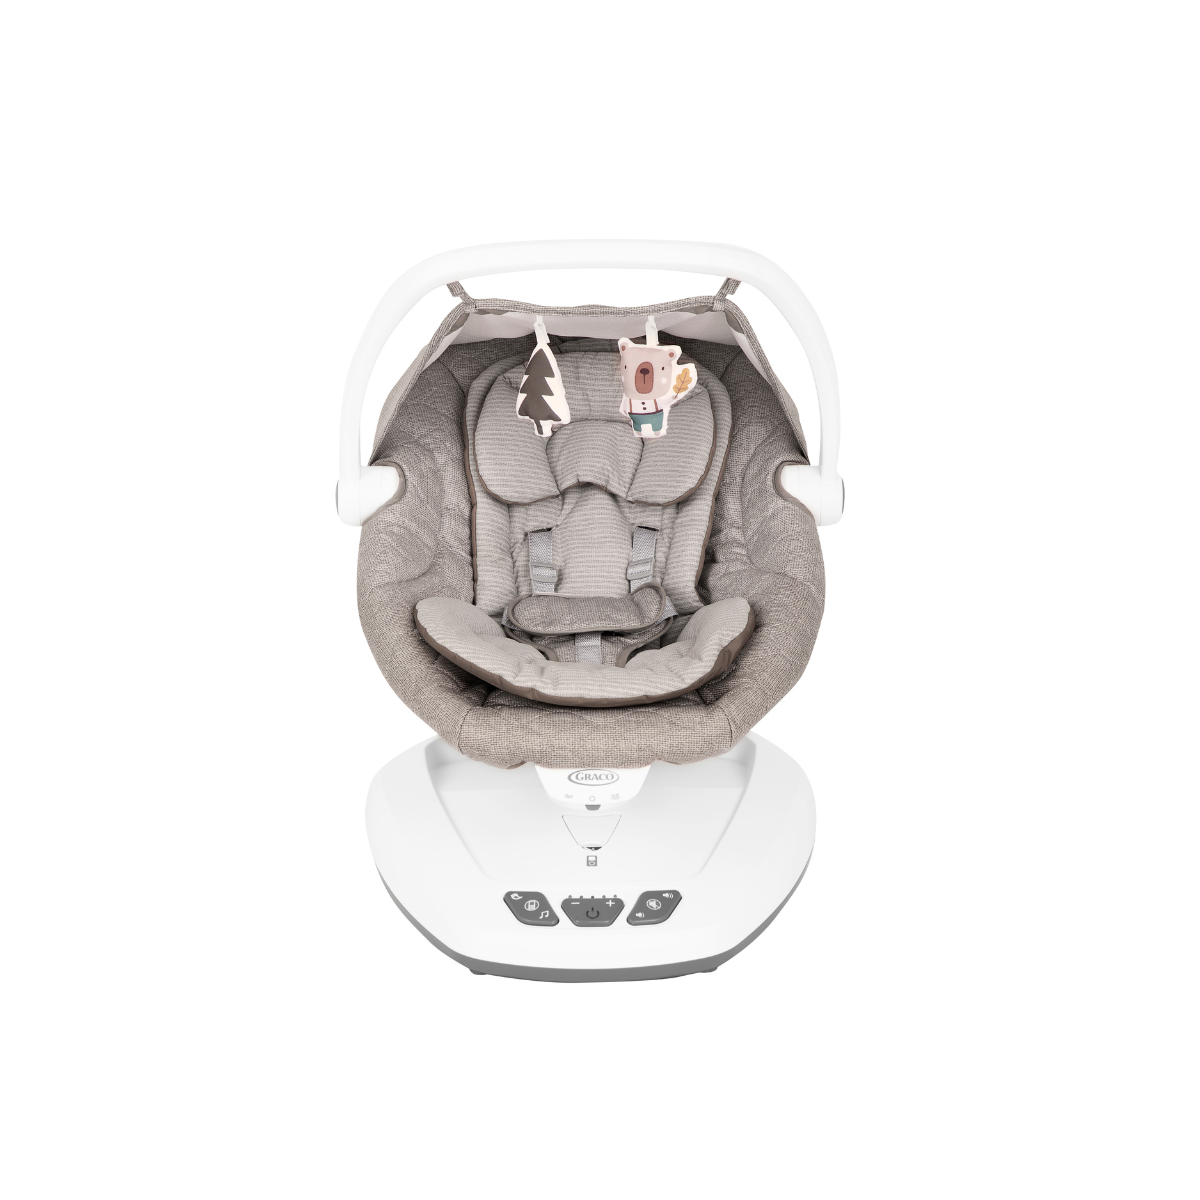 Easily Baby Portable Compact Me Move Graco With & Swing |